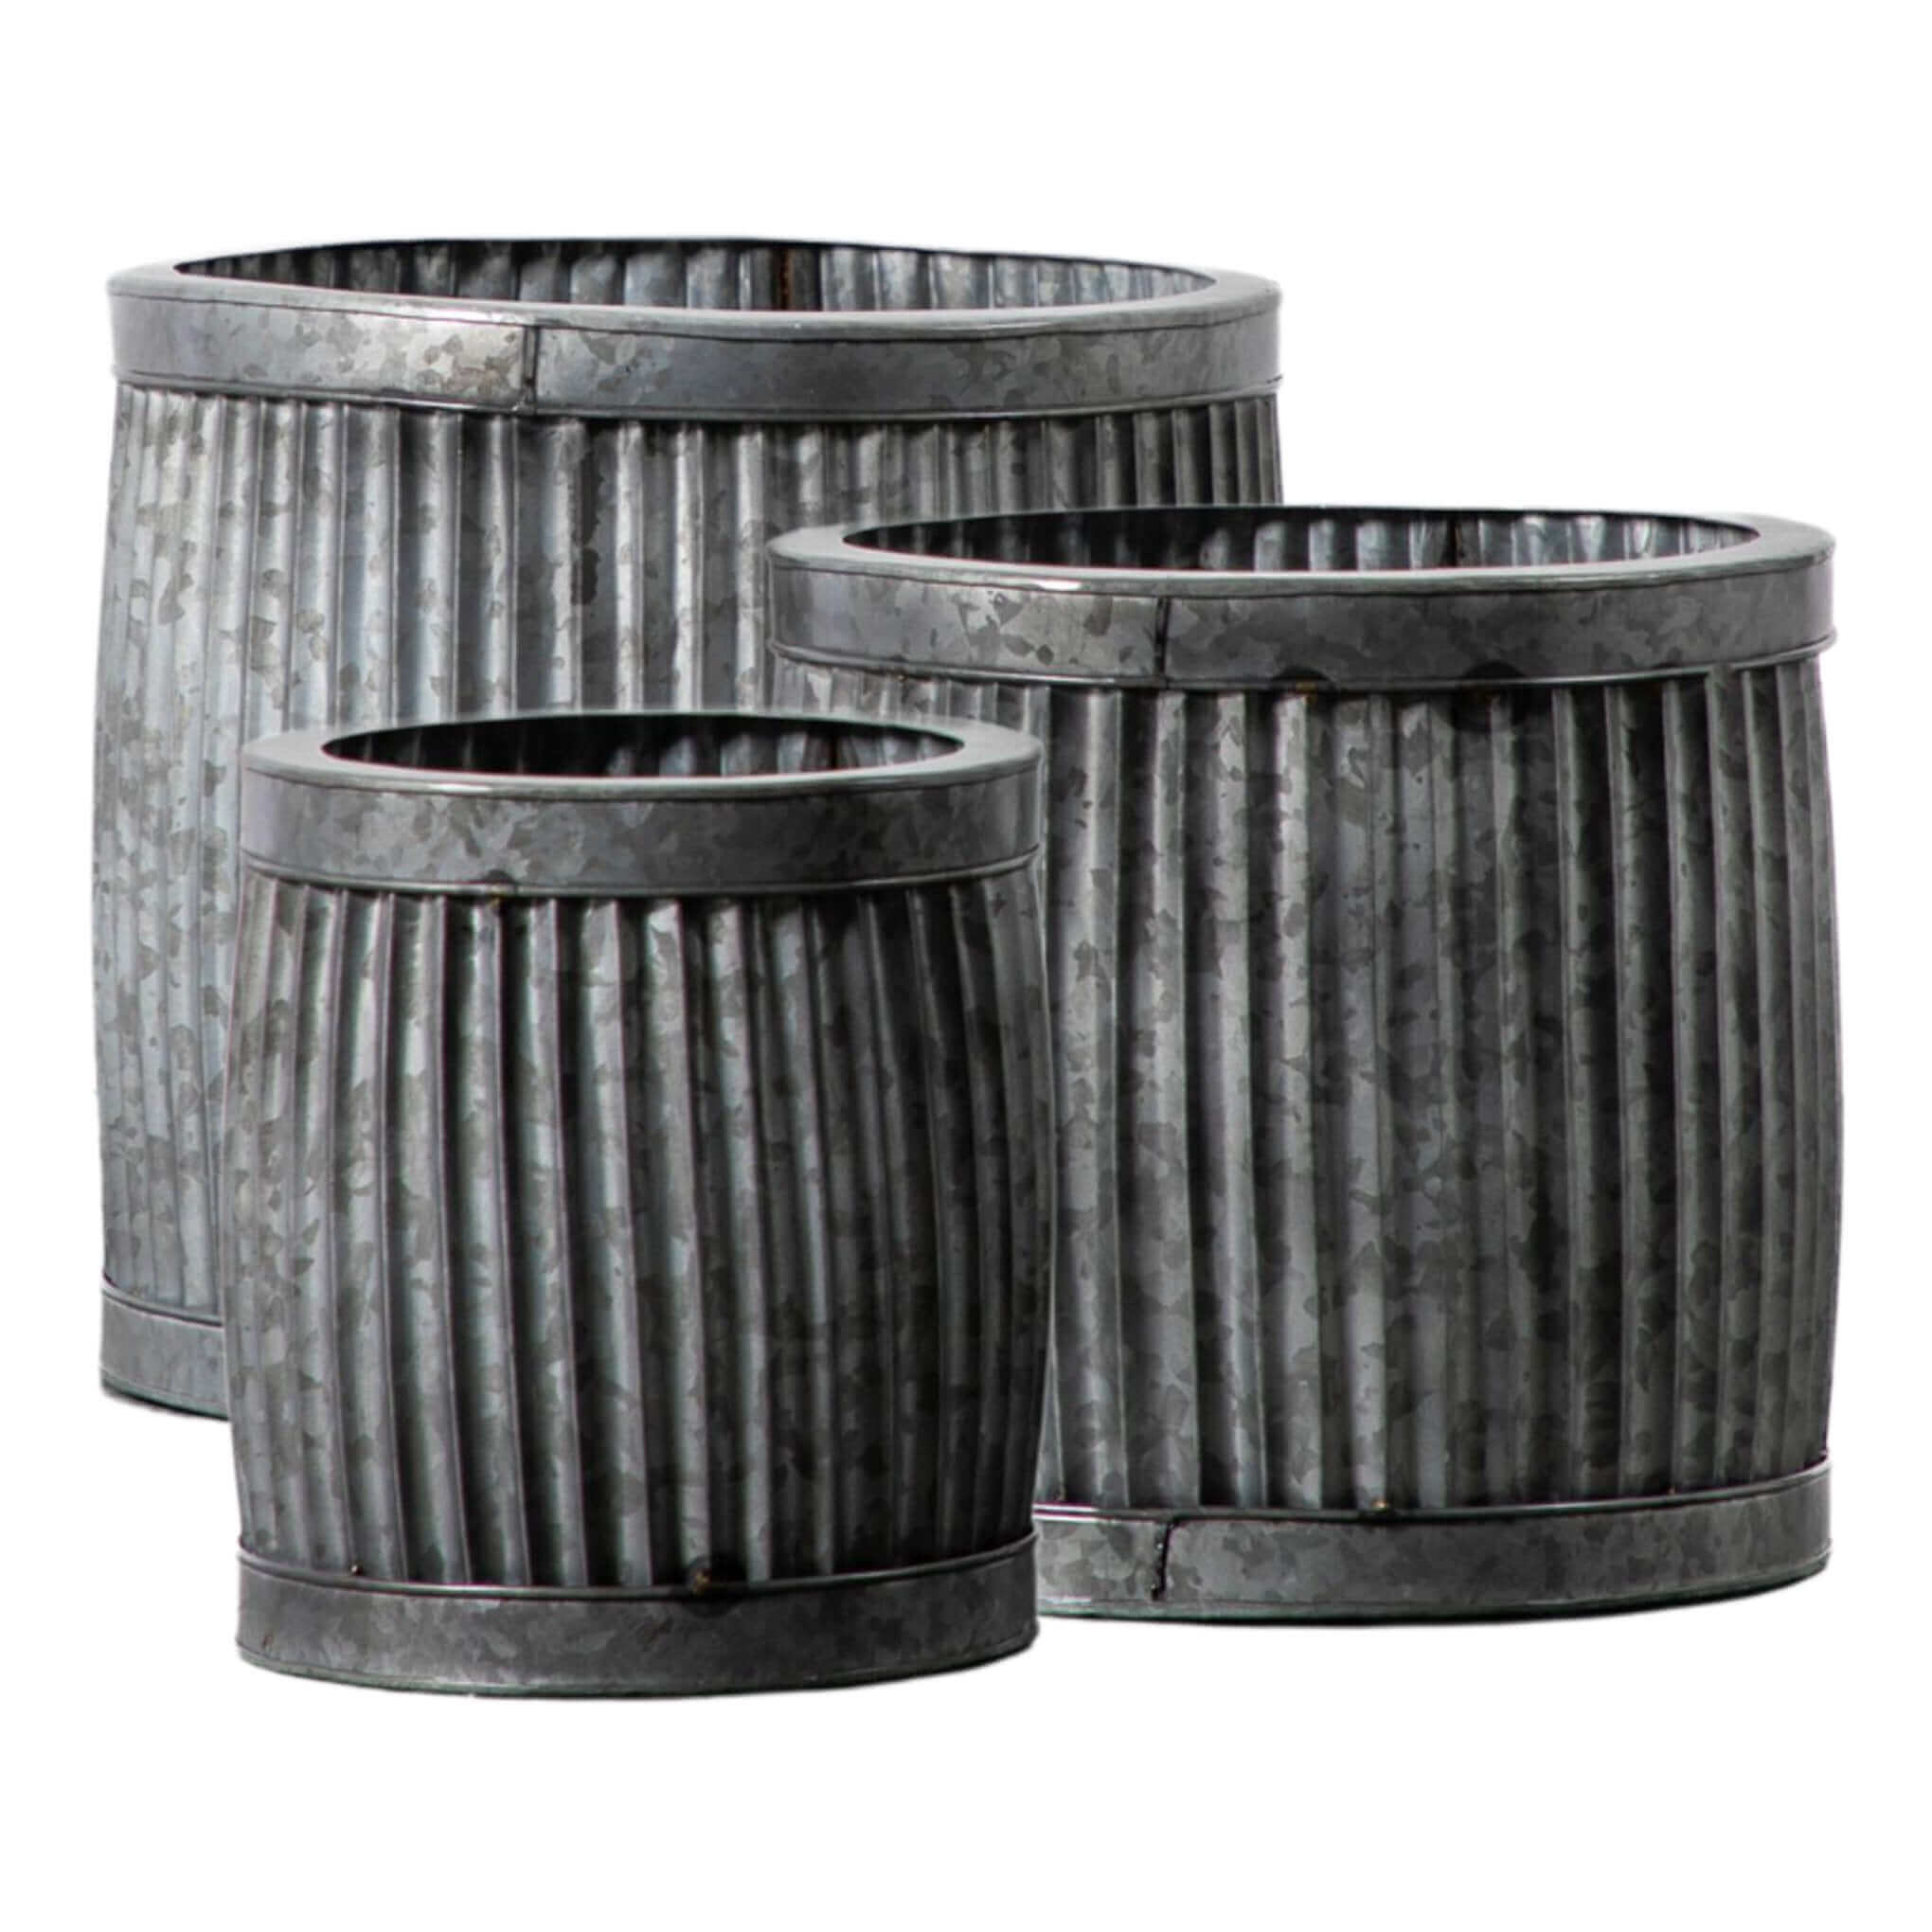 Galvanised Round Planters - Set of 3 - escapologyhome.co.uk